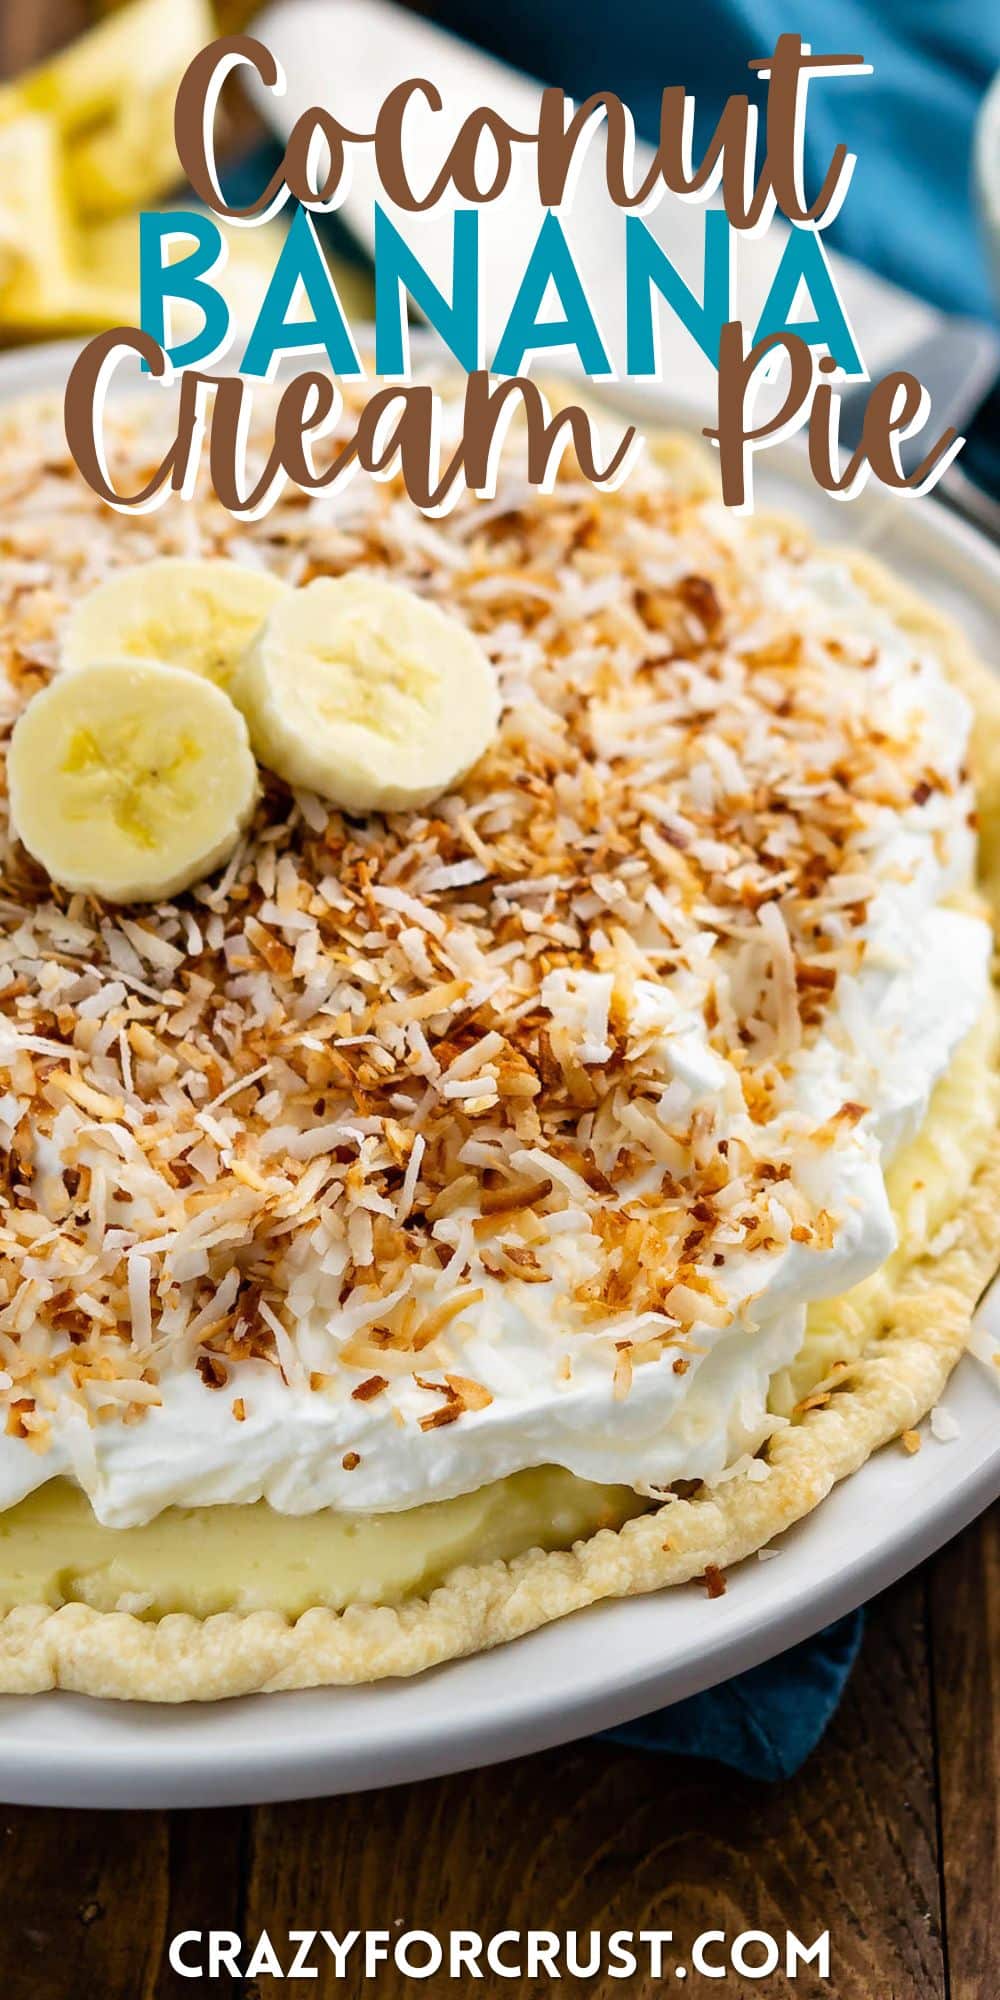 full banana cream pie topped with shredded coconut and sliced bananas with words on the image.